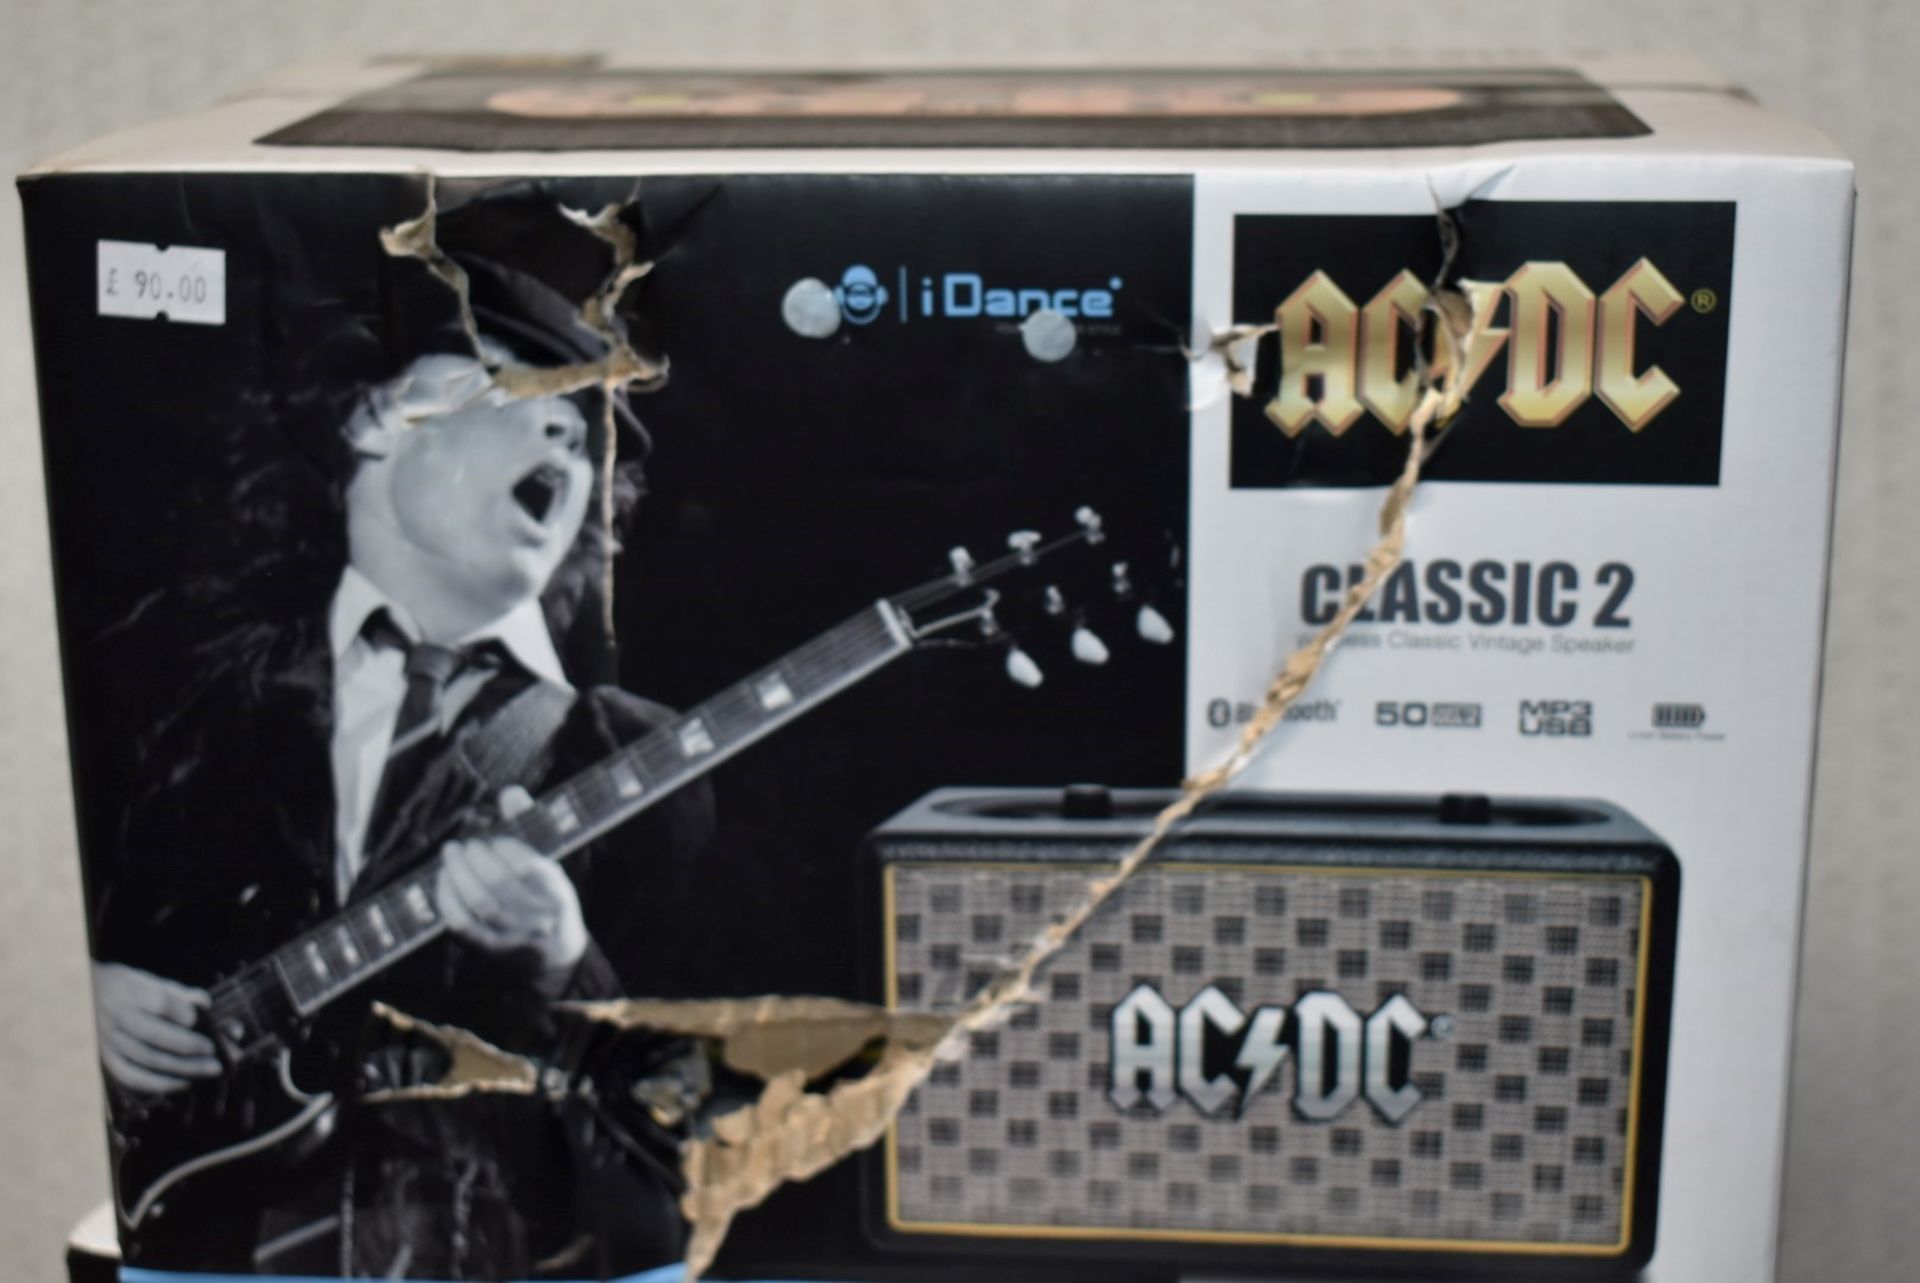 1 x iDance ACDC Vintage Amp Style Classic 2 Bluetooth Speaker - 50W Power - USB/MP3 Playback or - Image 3 of 4